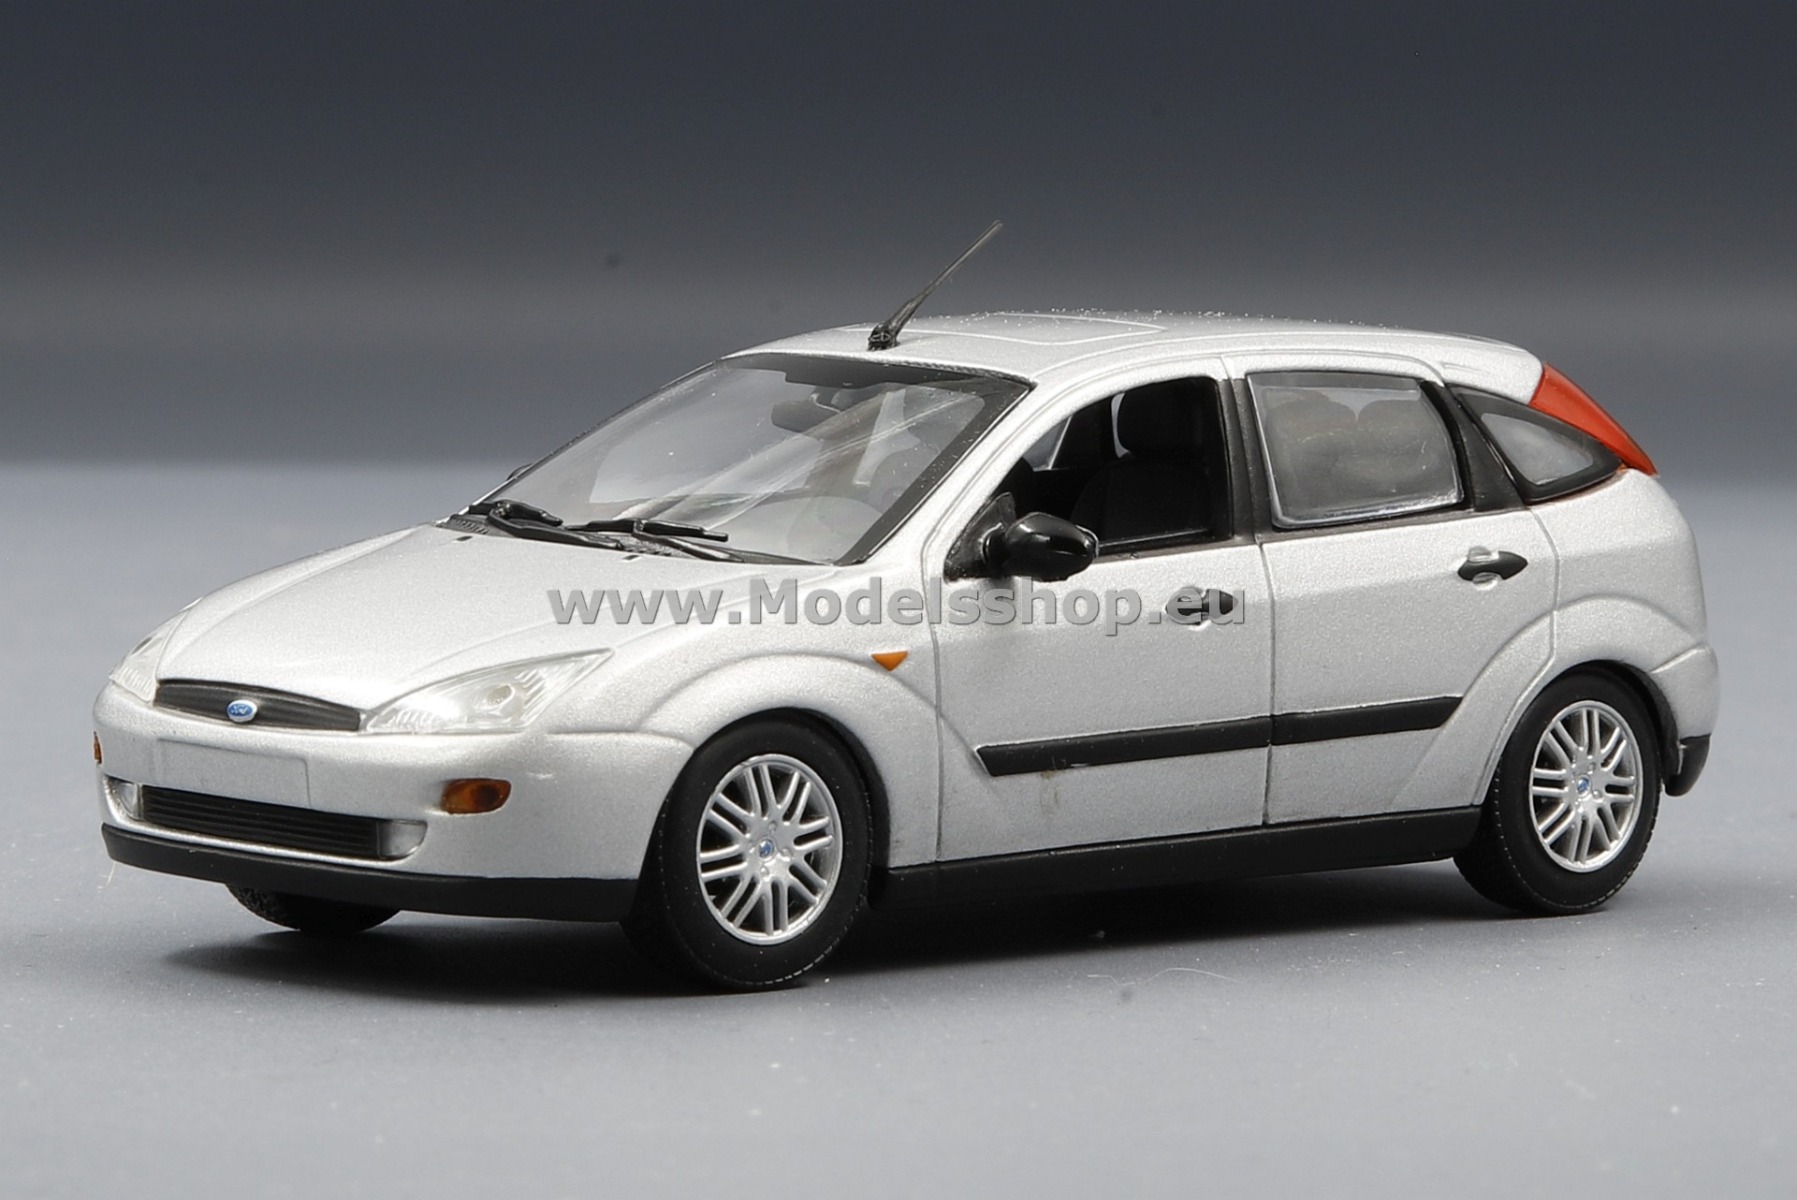 Minichamps FORD922159 Ford Focus I 1998 5d HB /silver metallic/